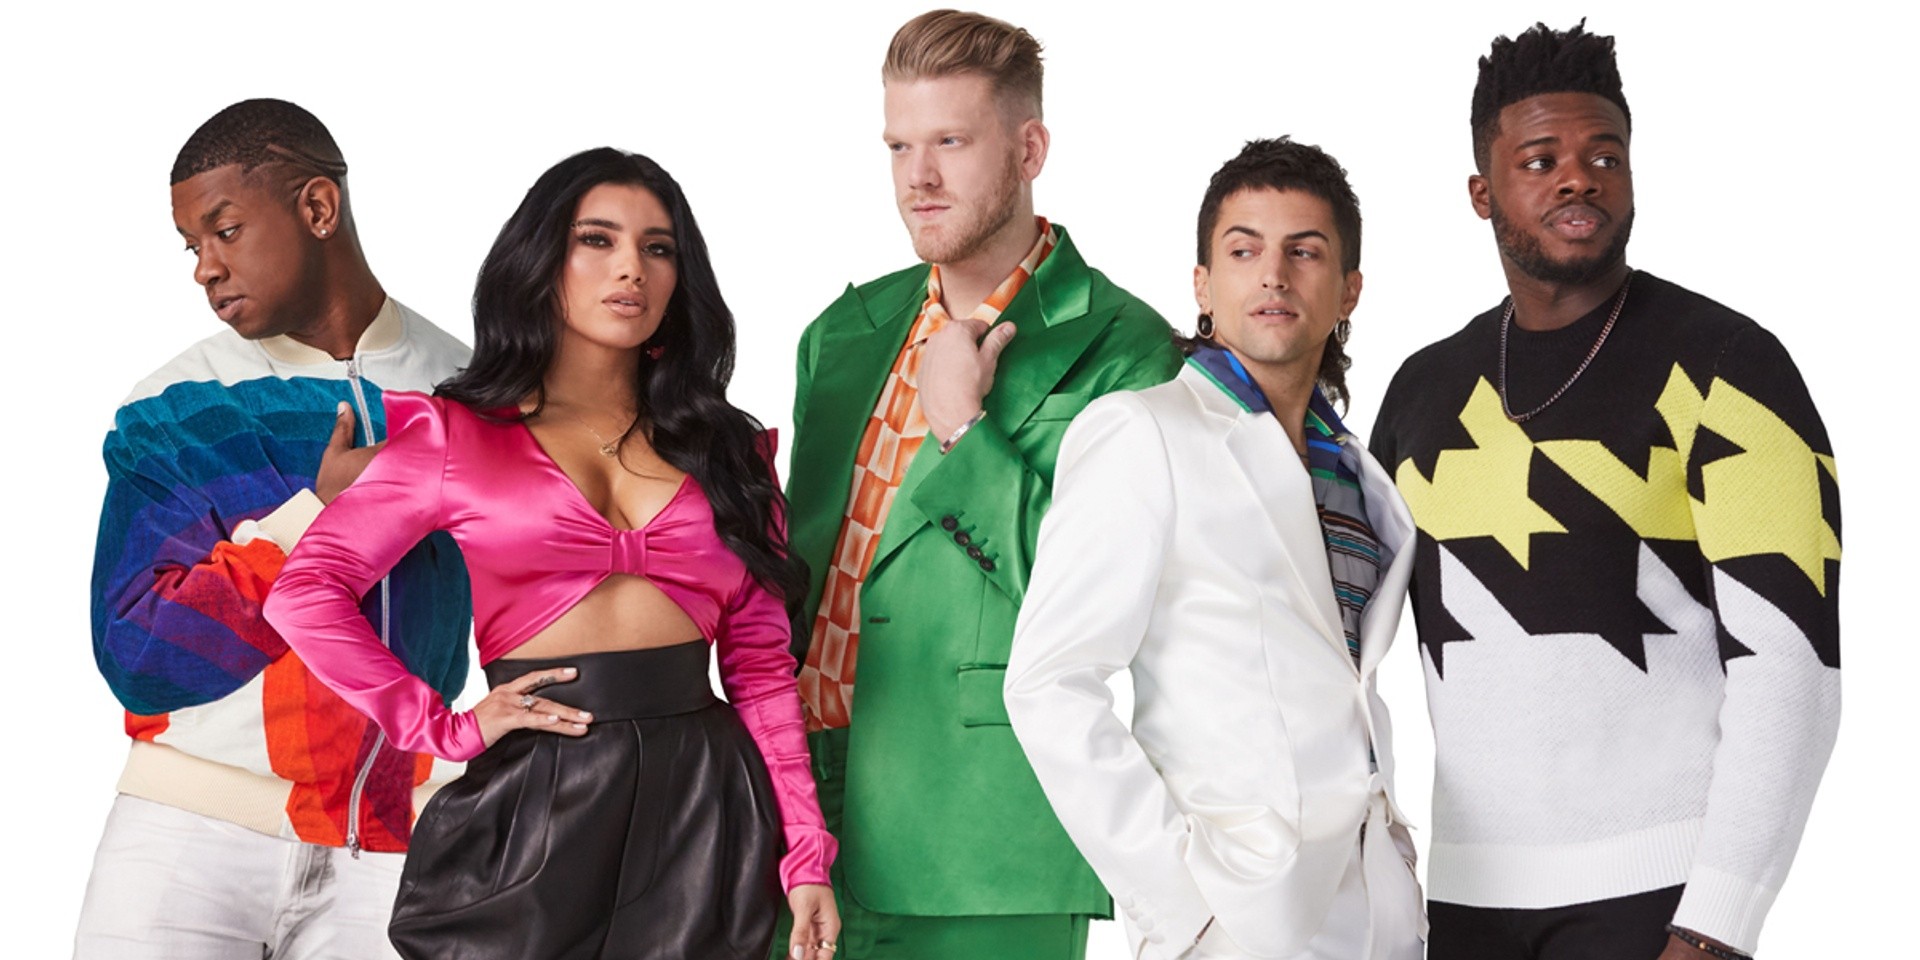 Pentatonix is returning to Singapore in 2020 for The World Tour